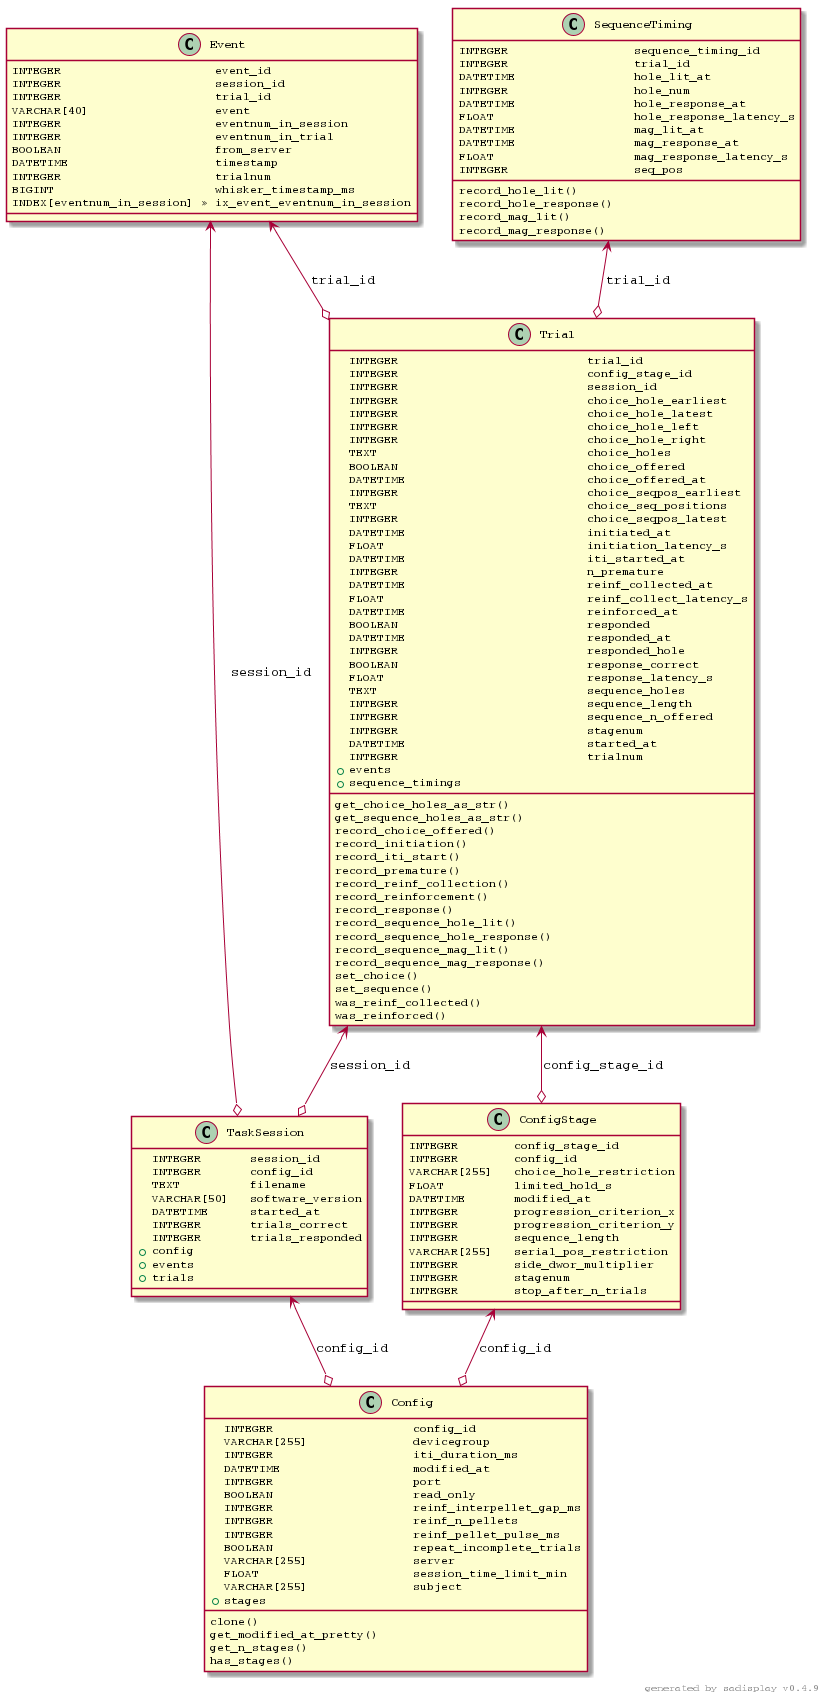 _images/database_schema.png